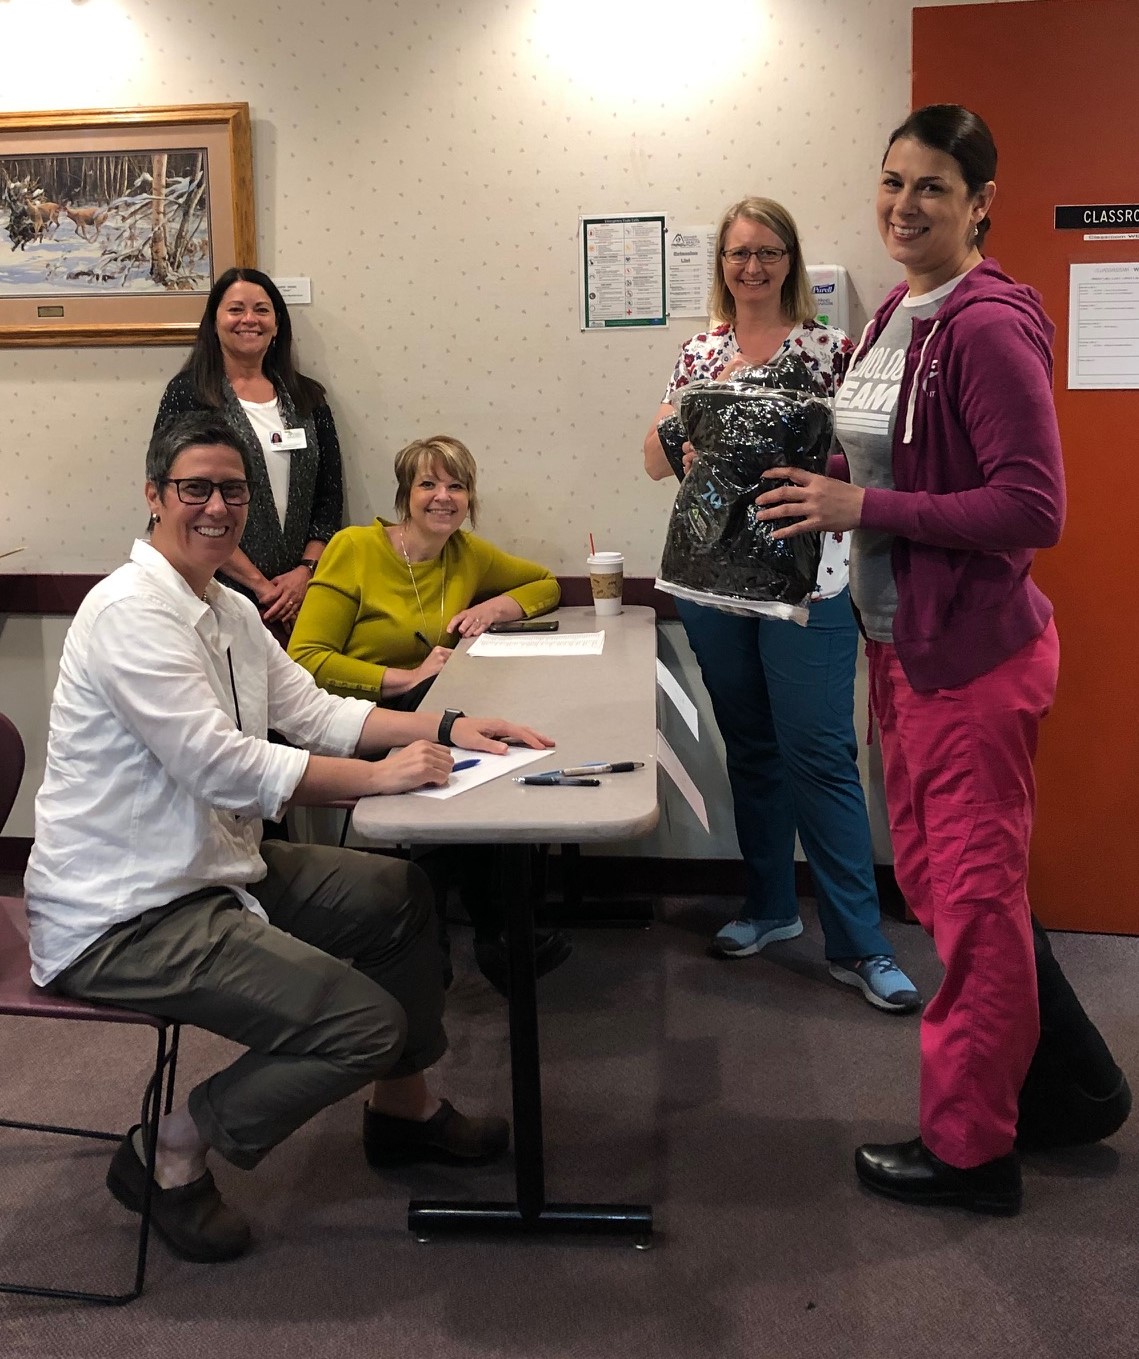 Monday 5.13.19 Employee Gift Distribution - Sheryl, Shannon, Tracy, Franci and Aimee